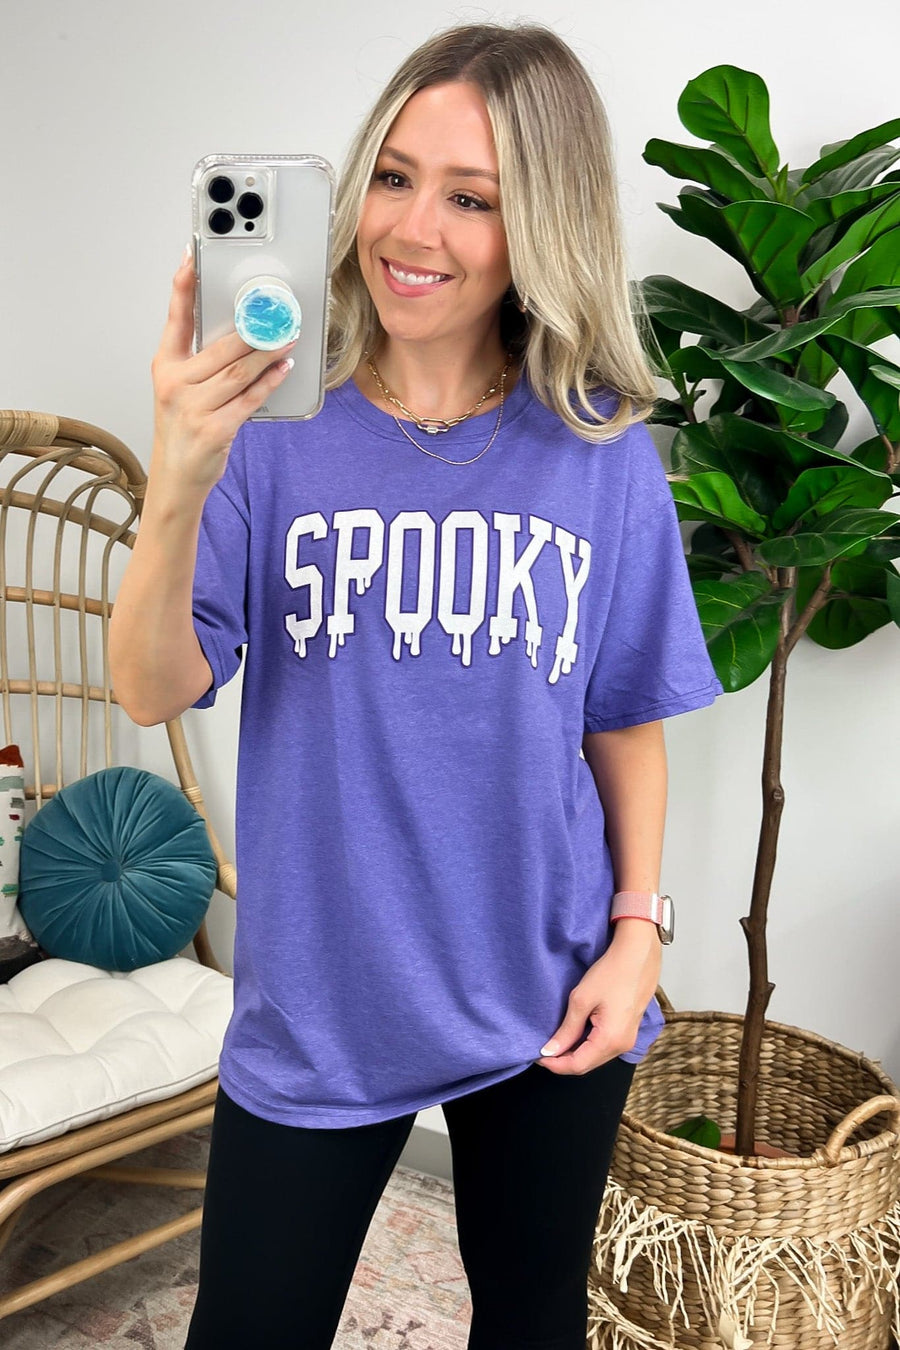  SPOOKY Melting Graphic Tee - Madison and Mallory